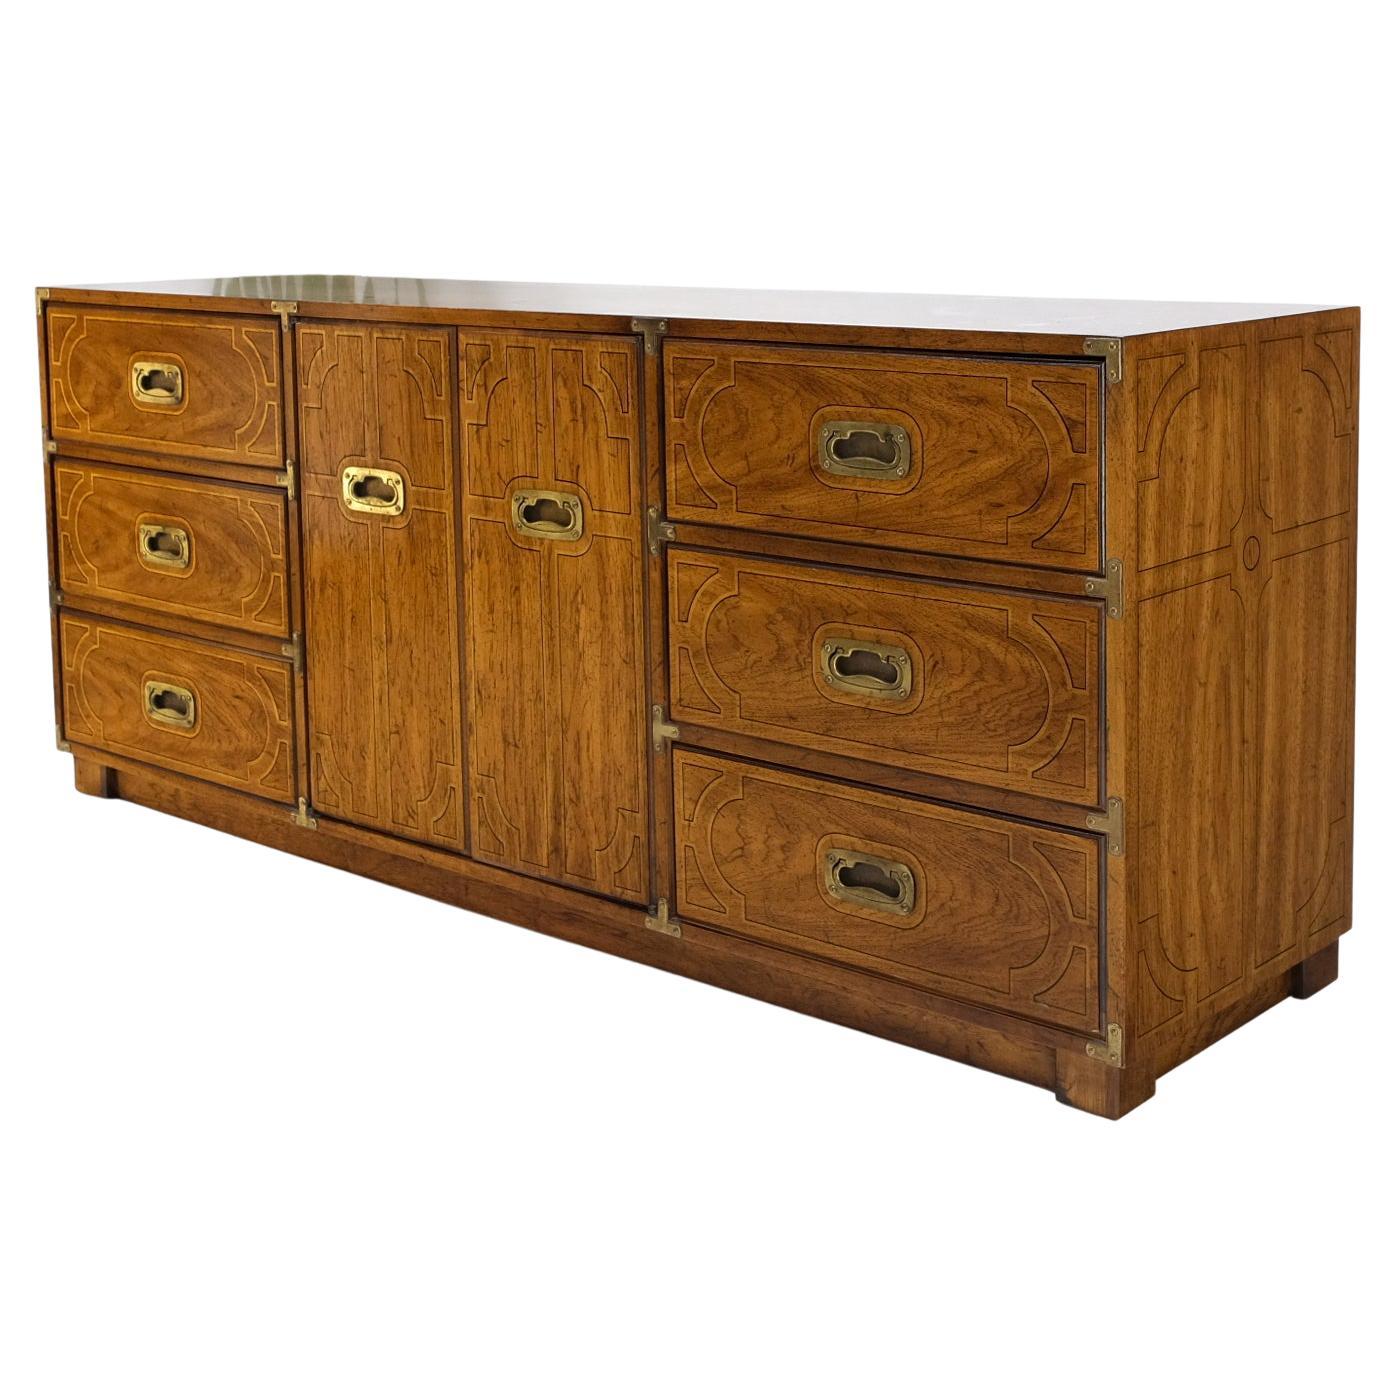 Campaign Style 9 Drawers Two Doors Compartment Paint Decorated Dresser Credenza For Sale